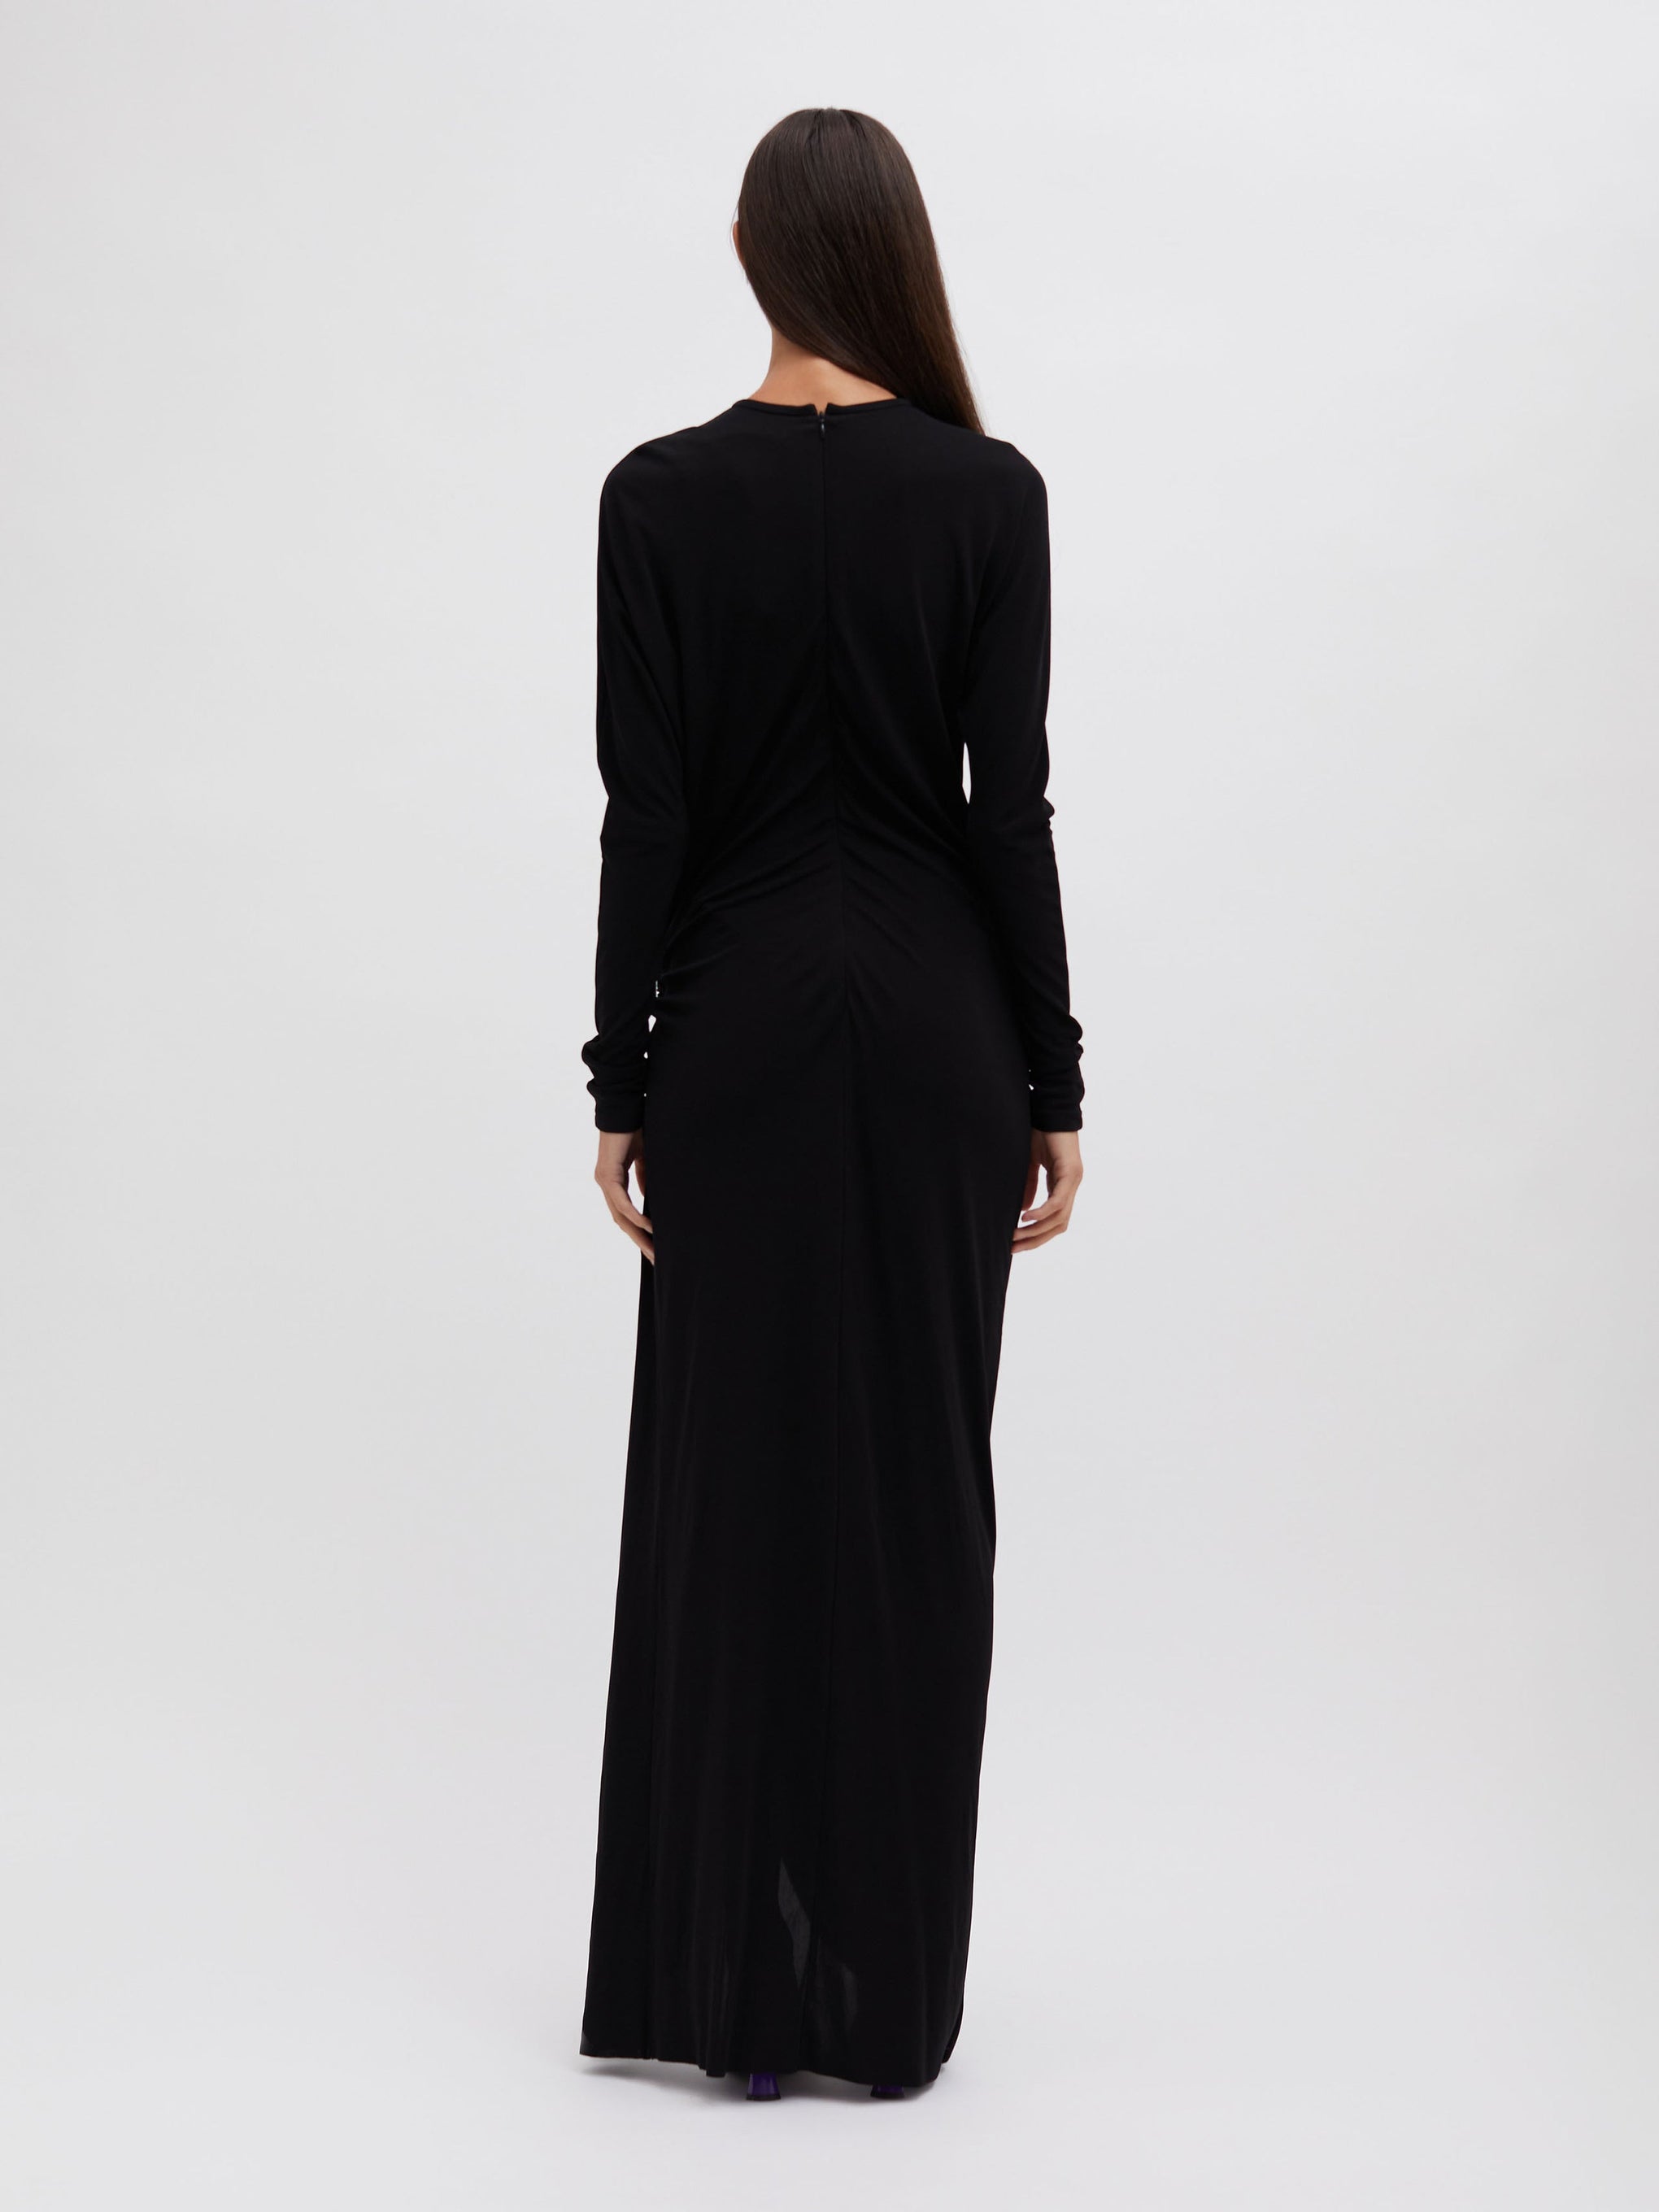 The Christopher Esber Helix Crystal Stone Long Sleeve Dress in Black available at The New Trend Australia